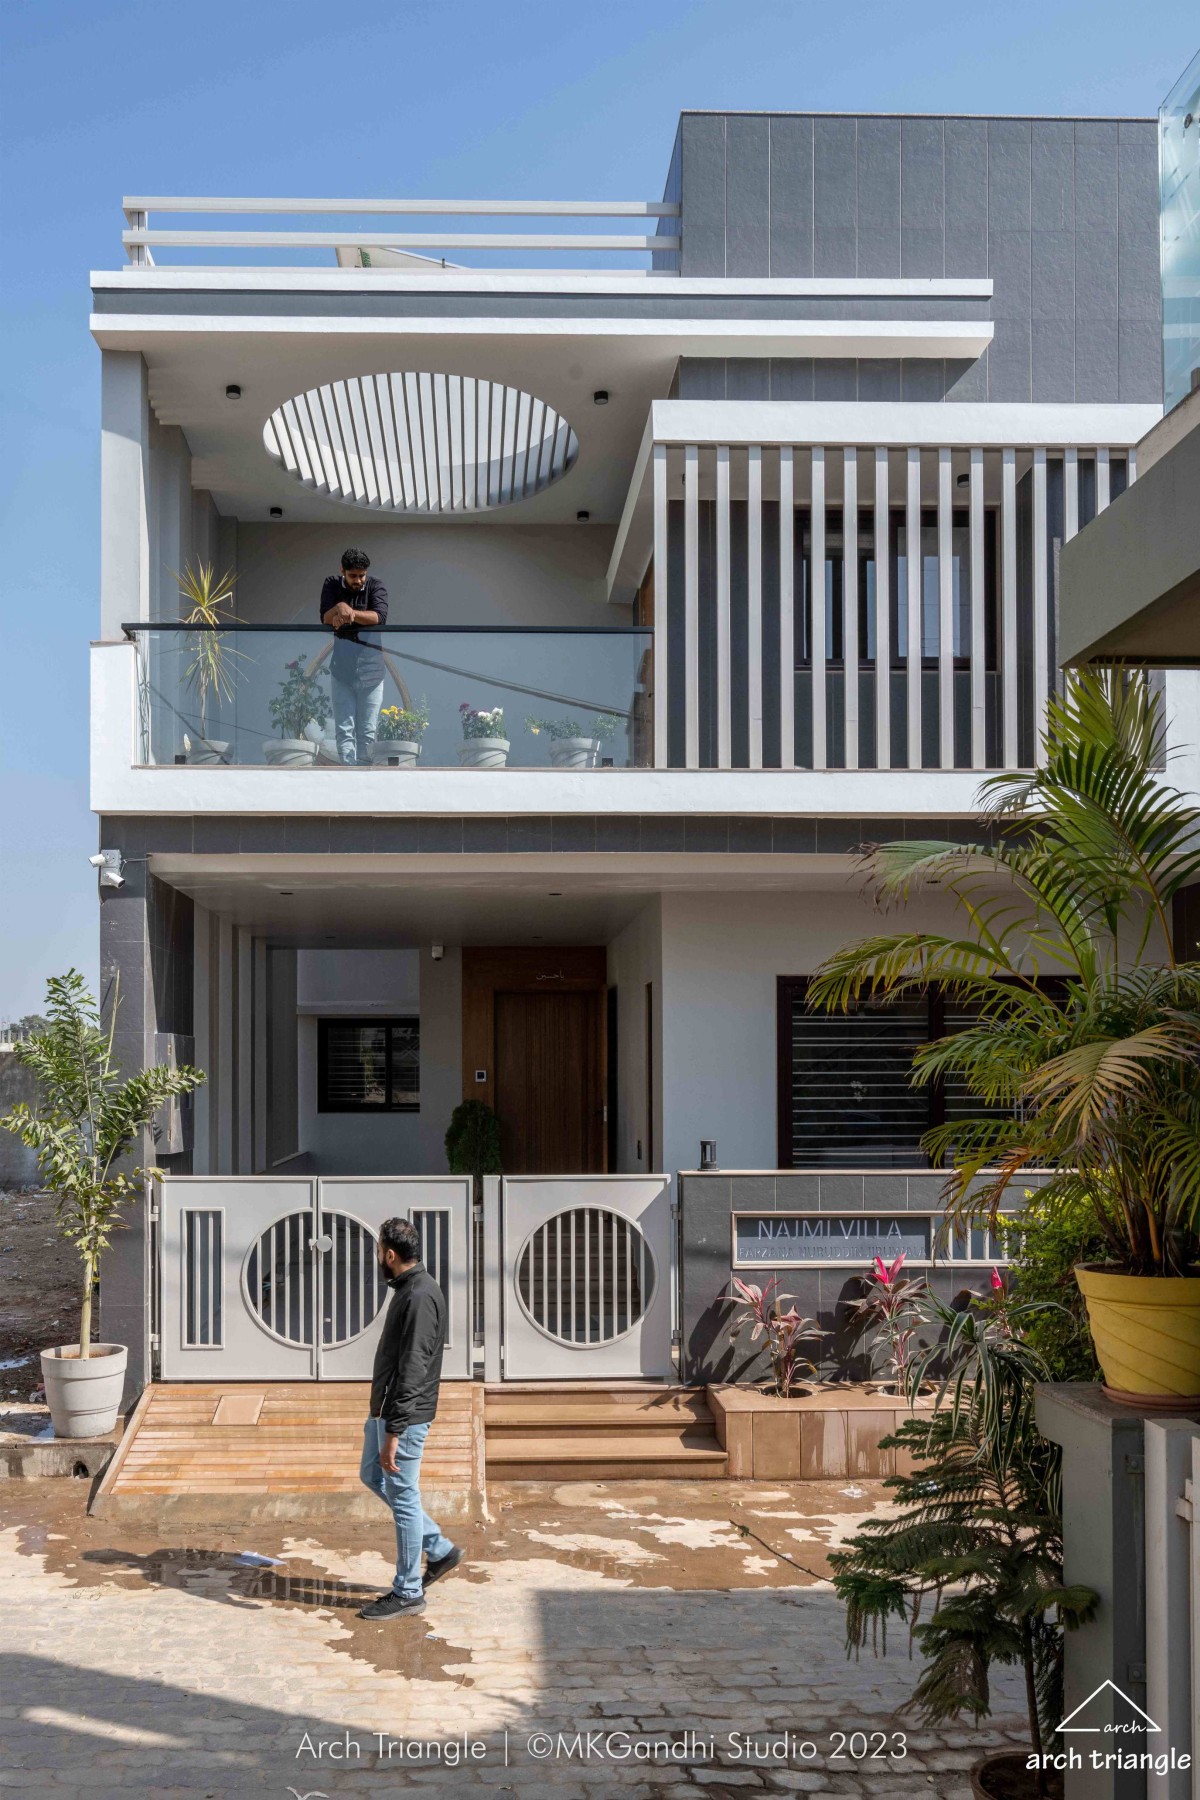 Exterior view of Jiruwala Residence by Arch Triangle